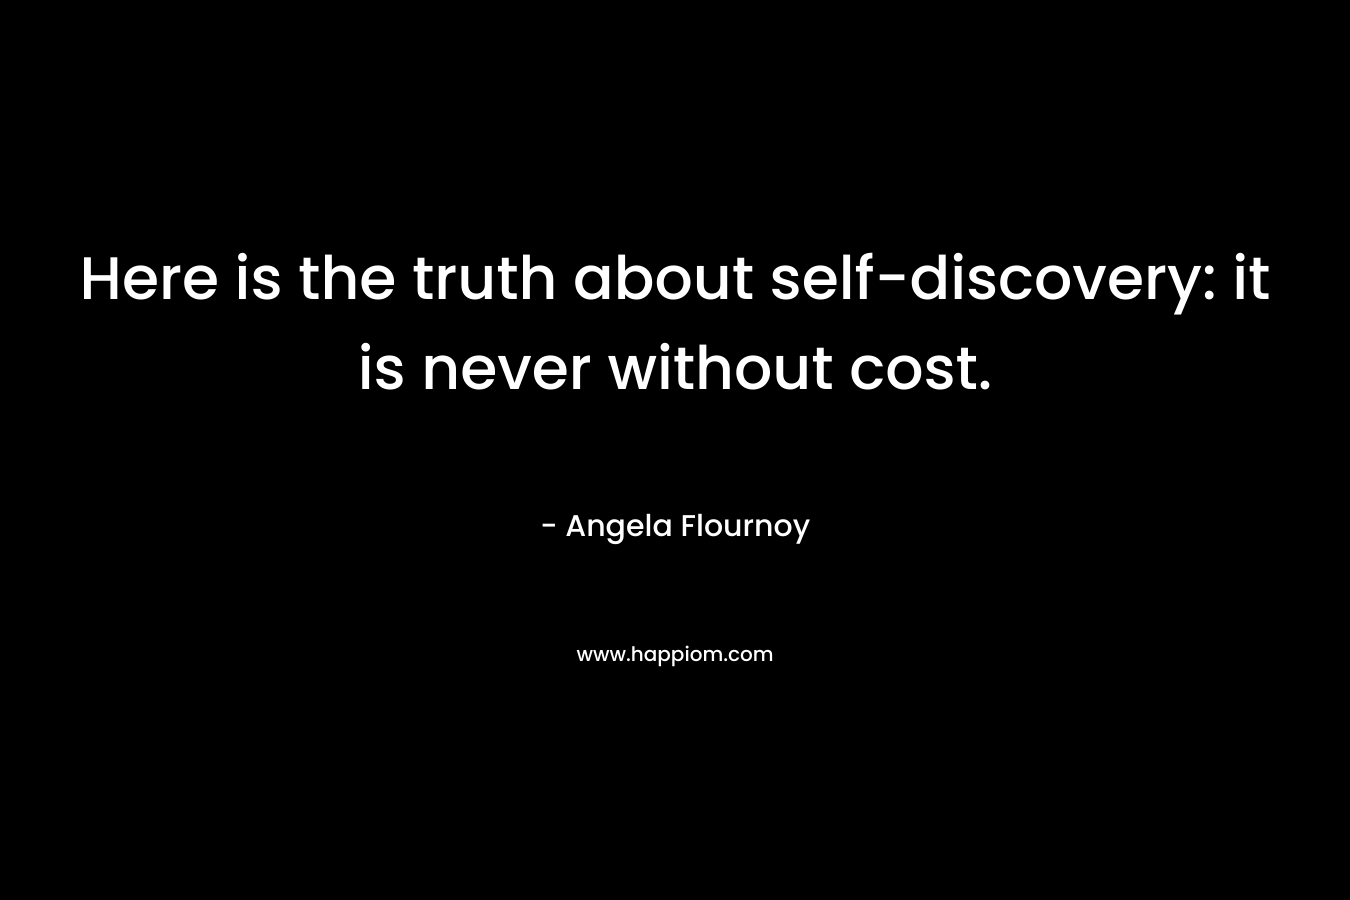 Here is the truth about self-discovery: it is never without cost.